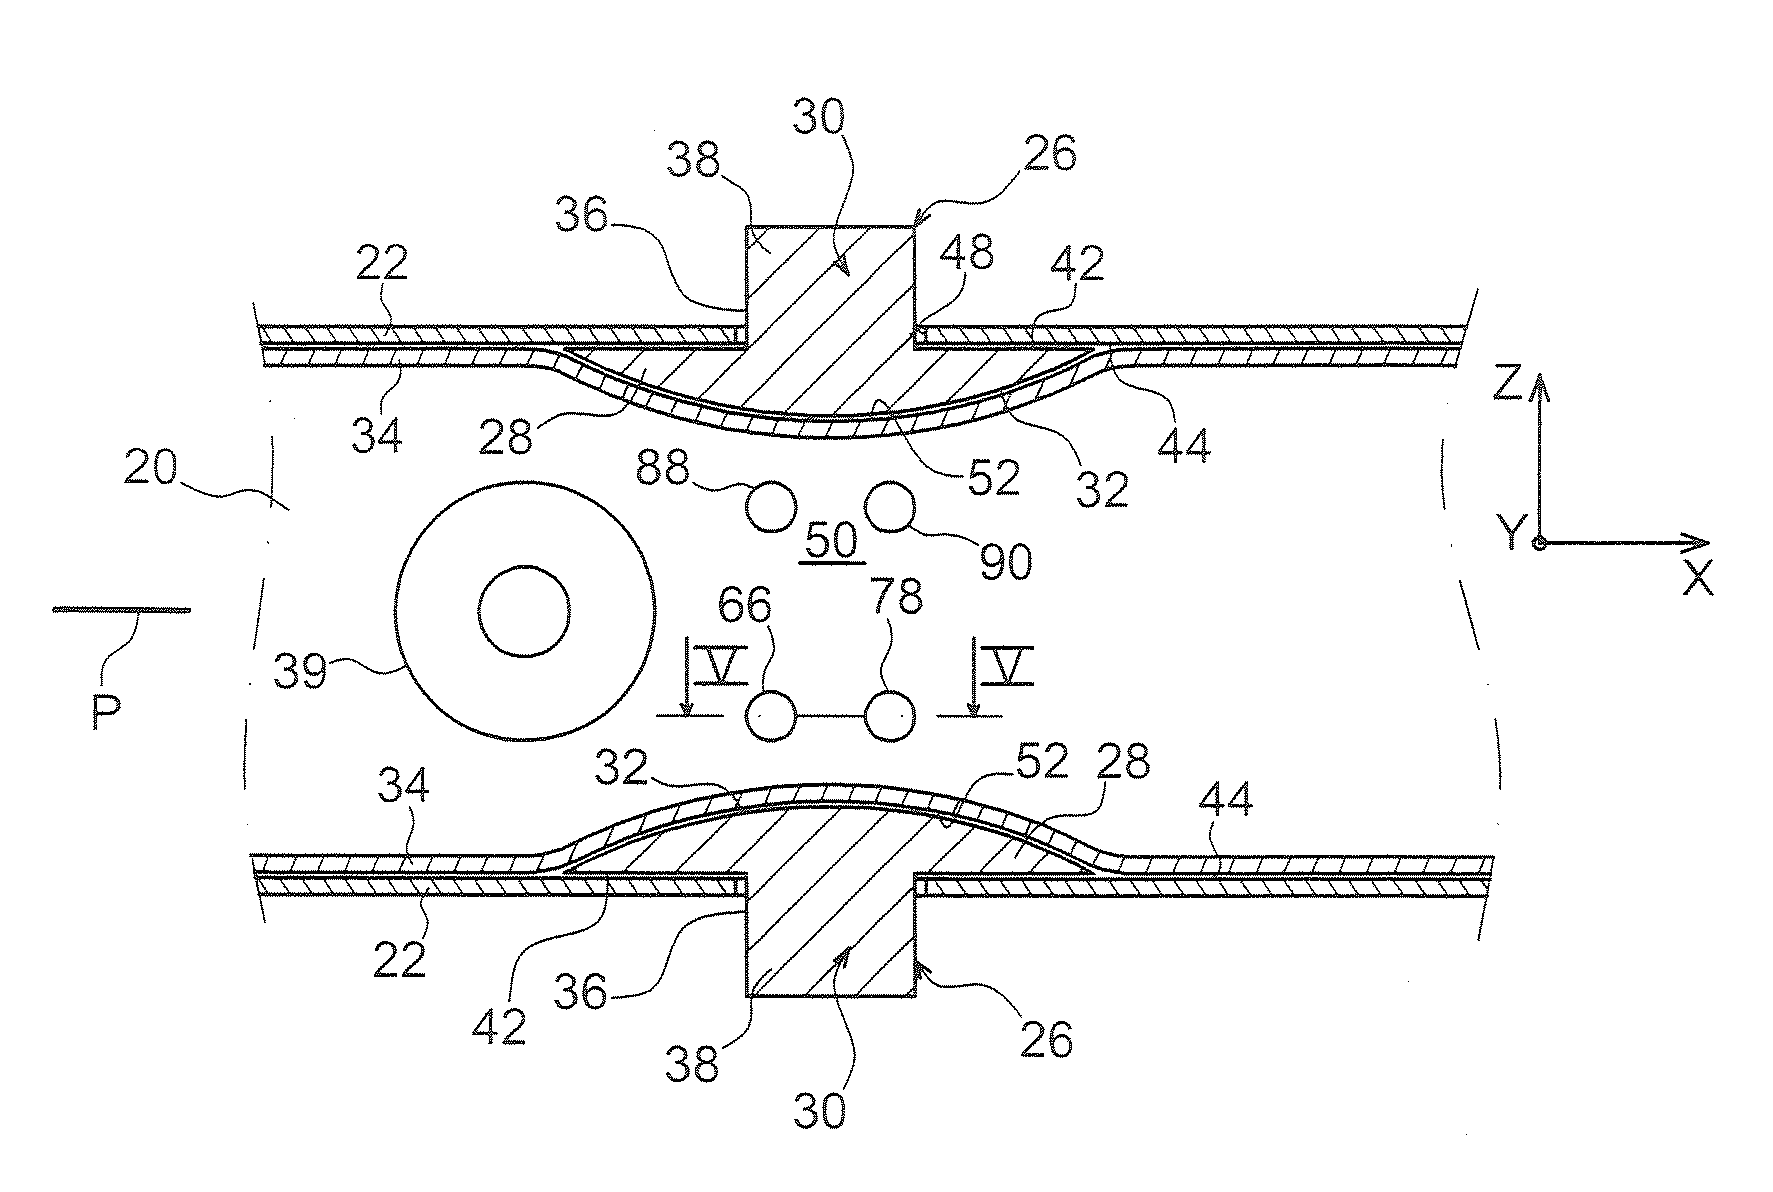 Engine Mounting Structure for an Aircraft